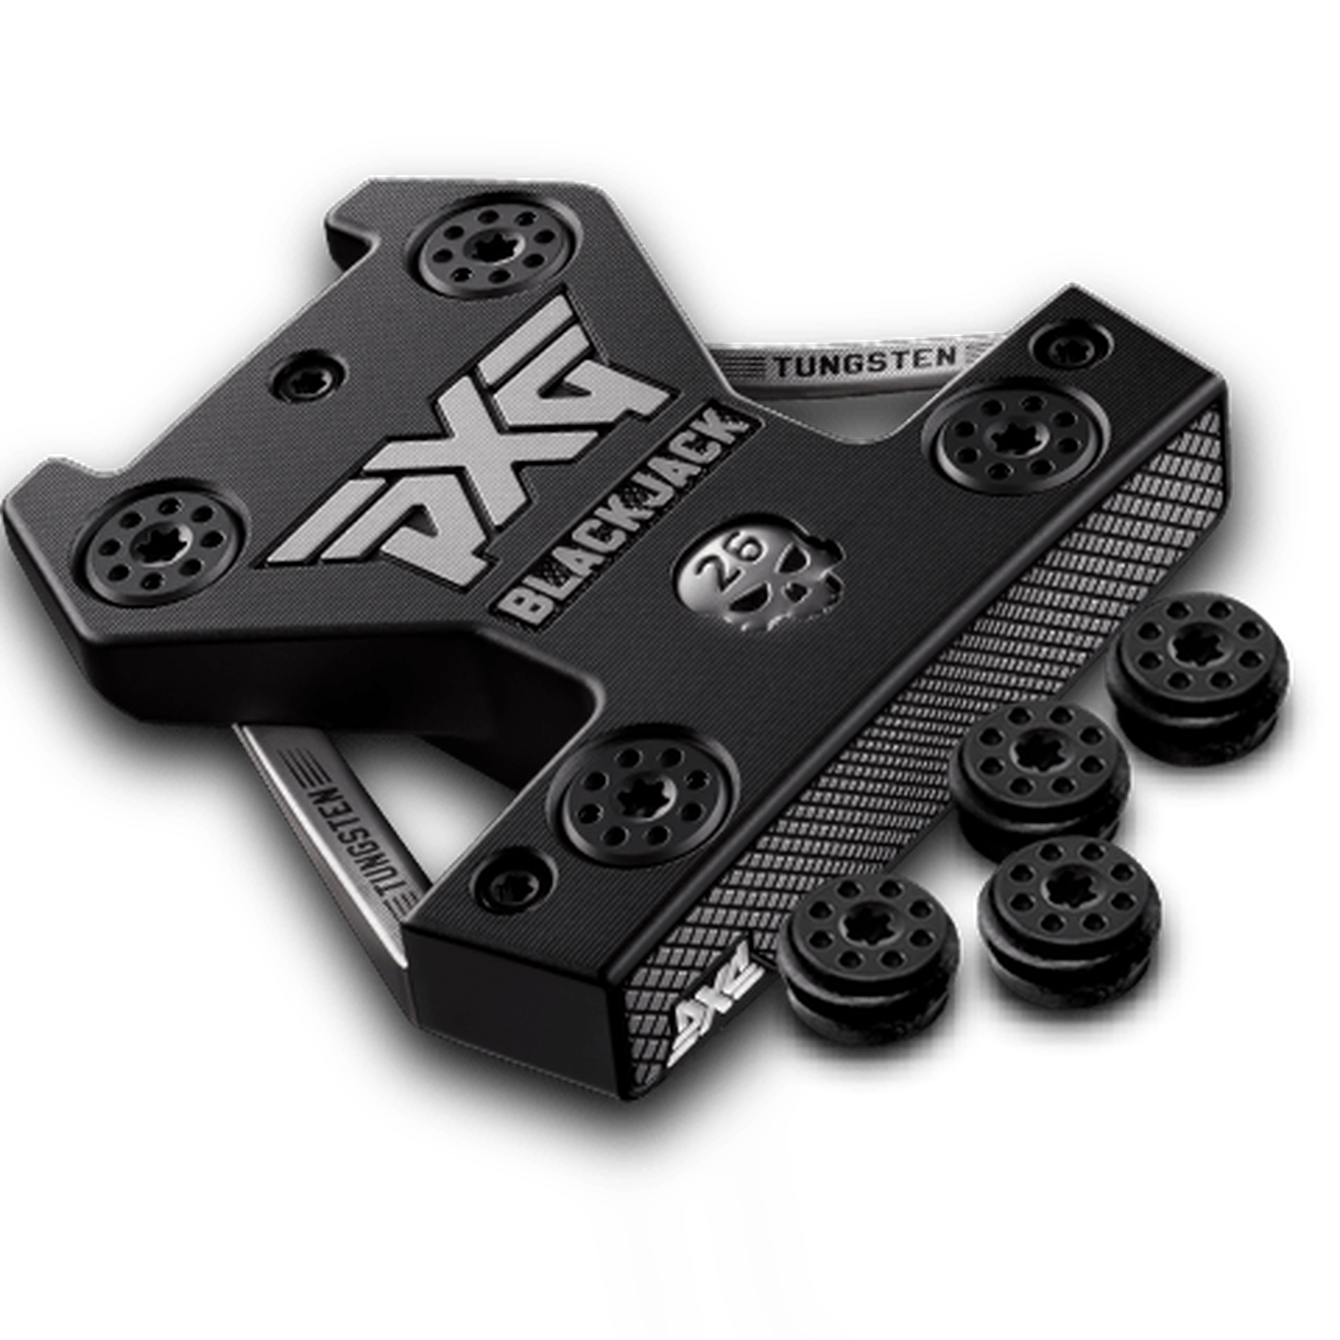 PXG Battle Ready Blackjack Putter with adjustable weighting technology